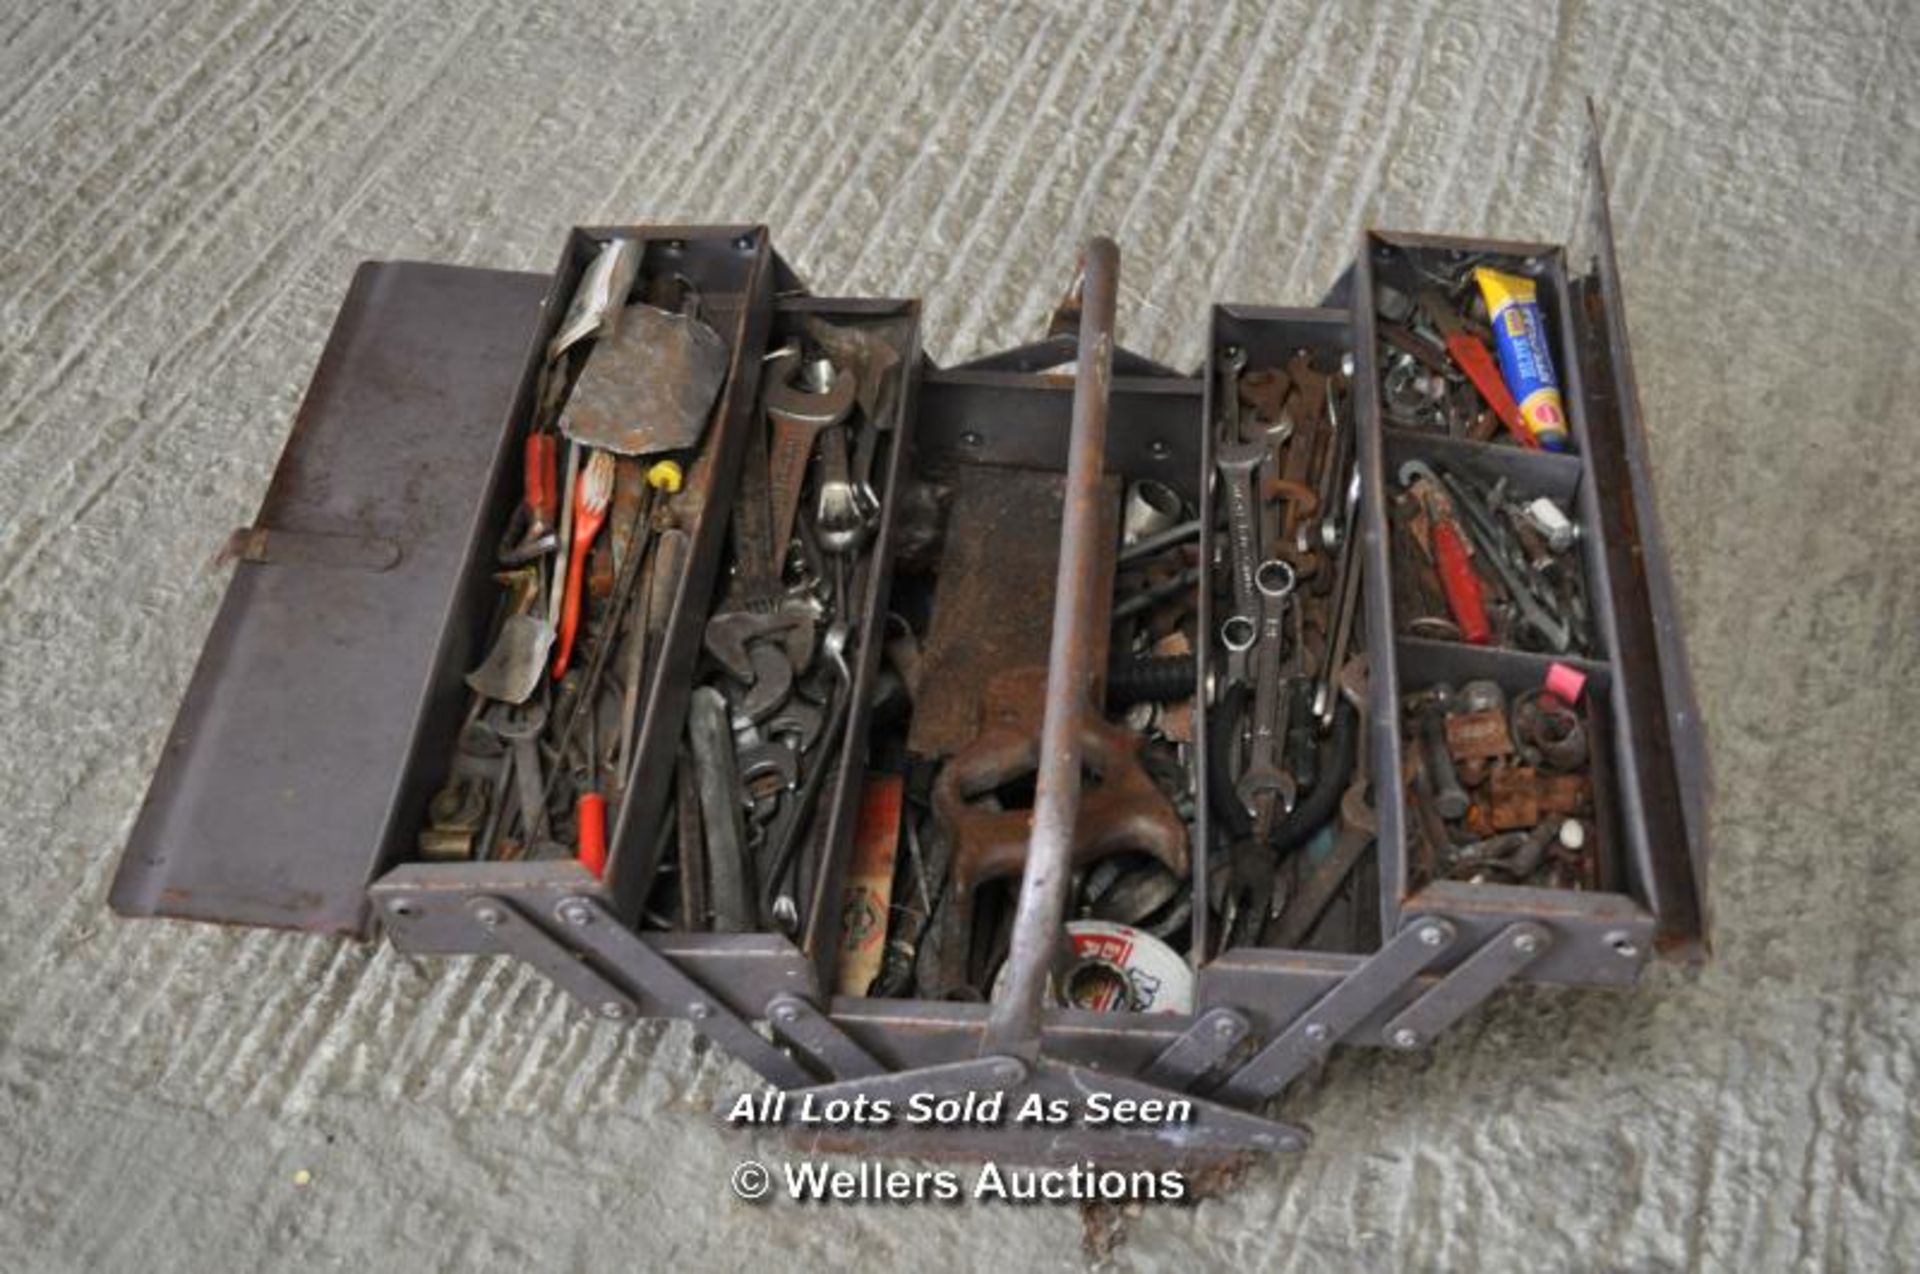 METAL FOLD OUT TOOLBOX FULL OF OLD TOOLS INCLUDING SPANNERS, NUTS AND BOLTS ETC